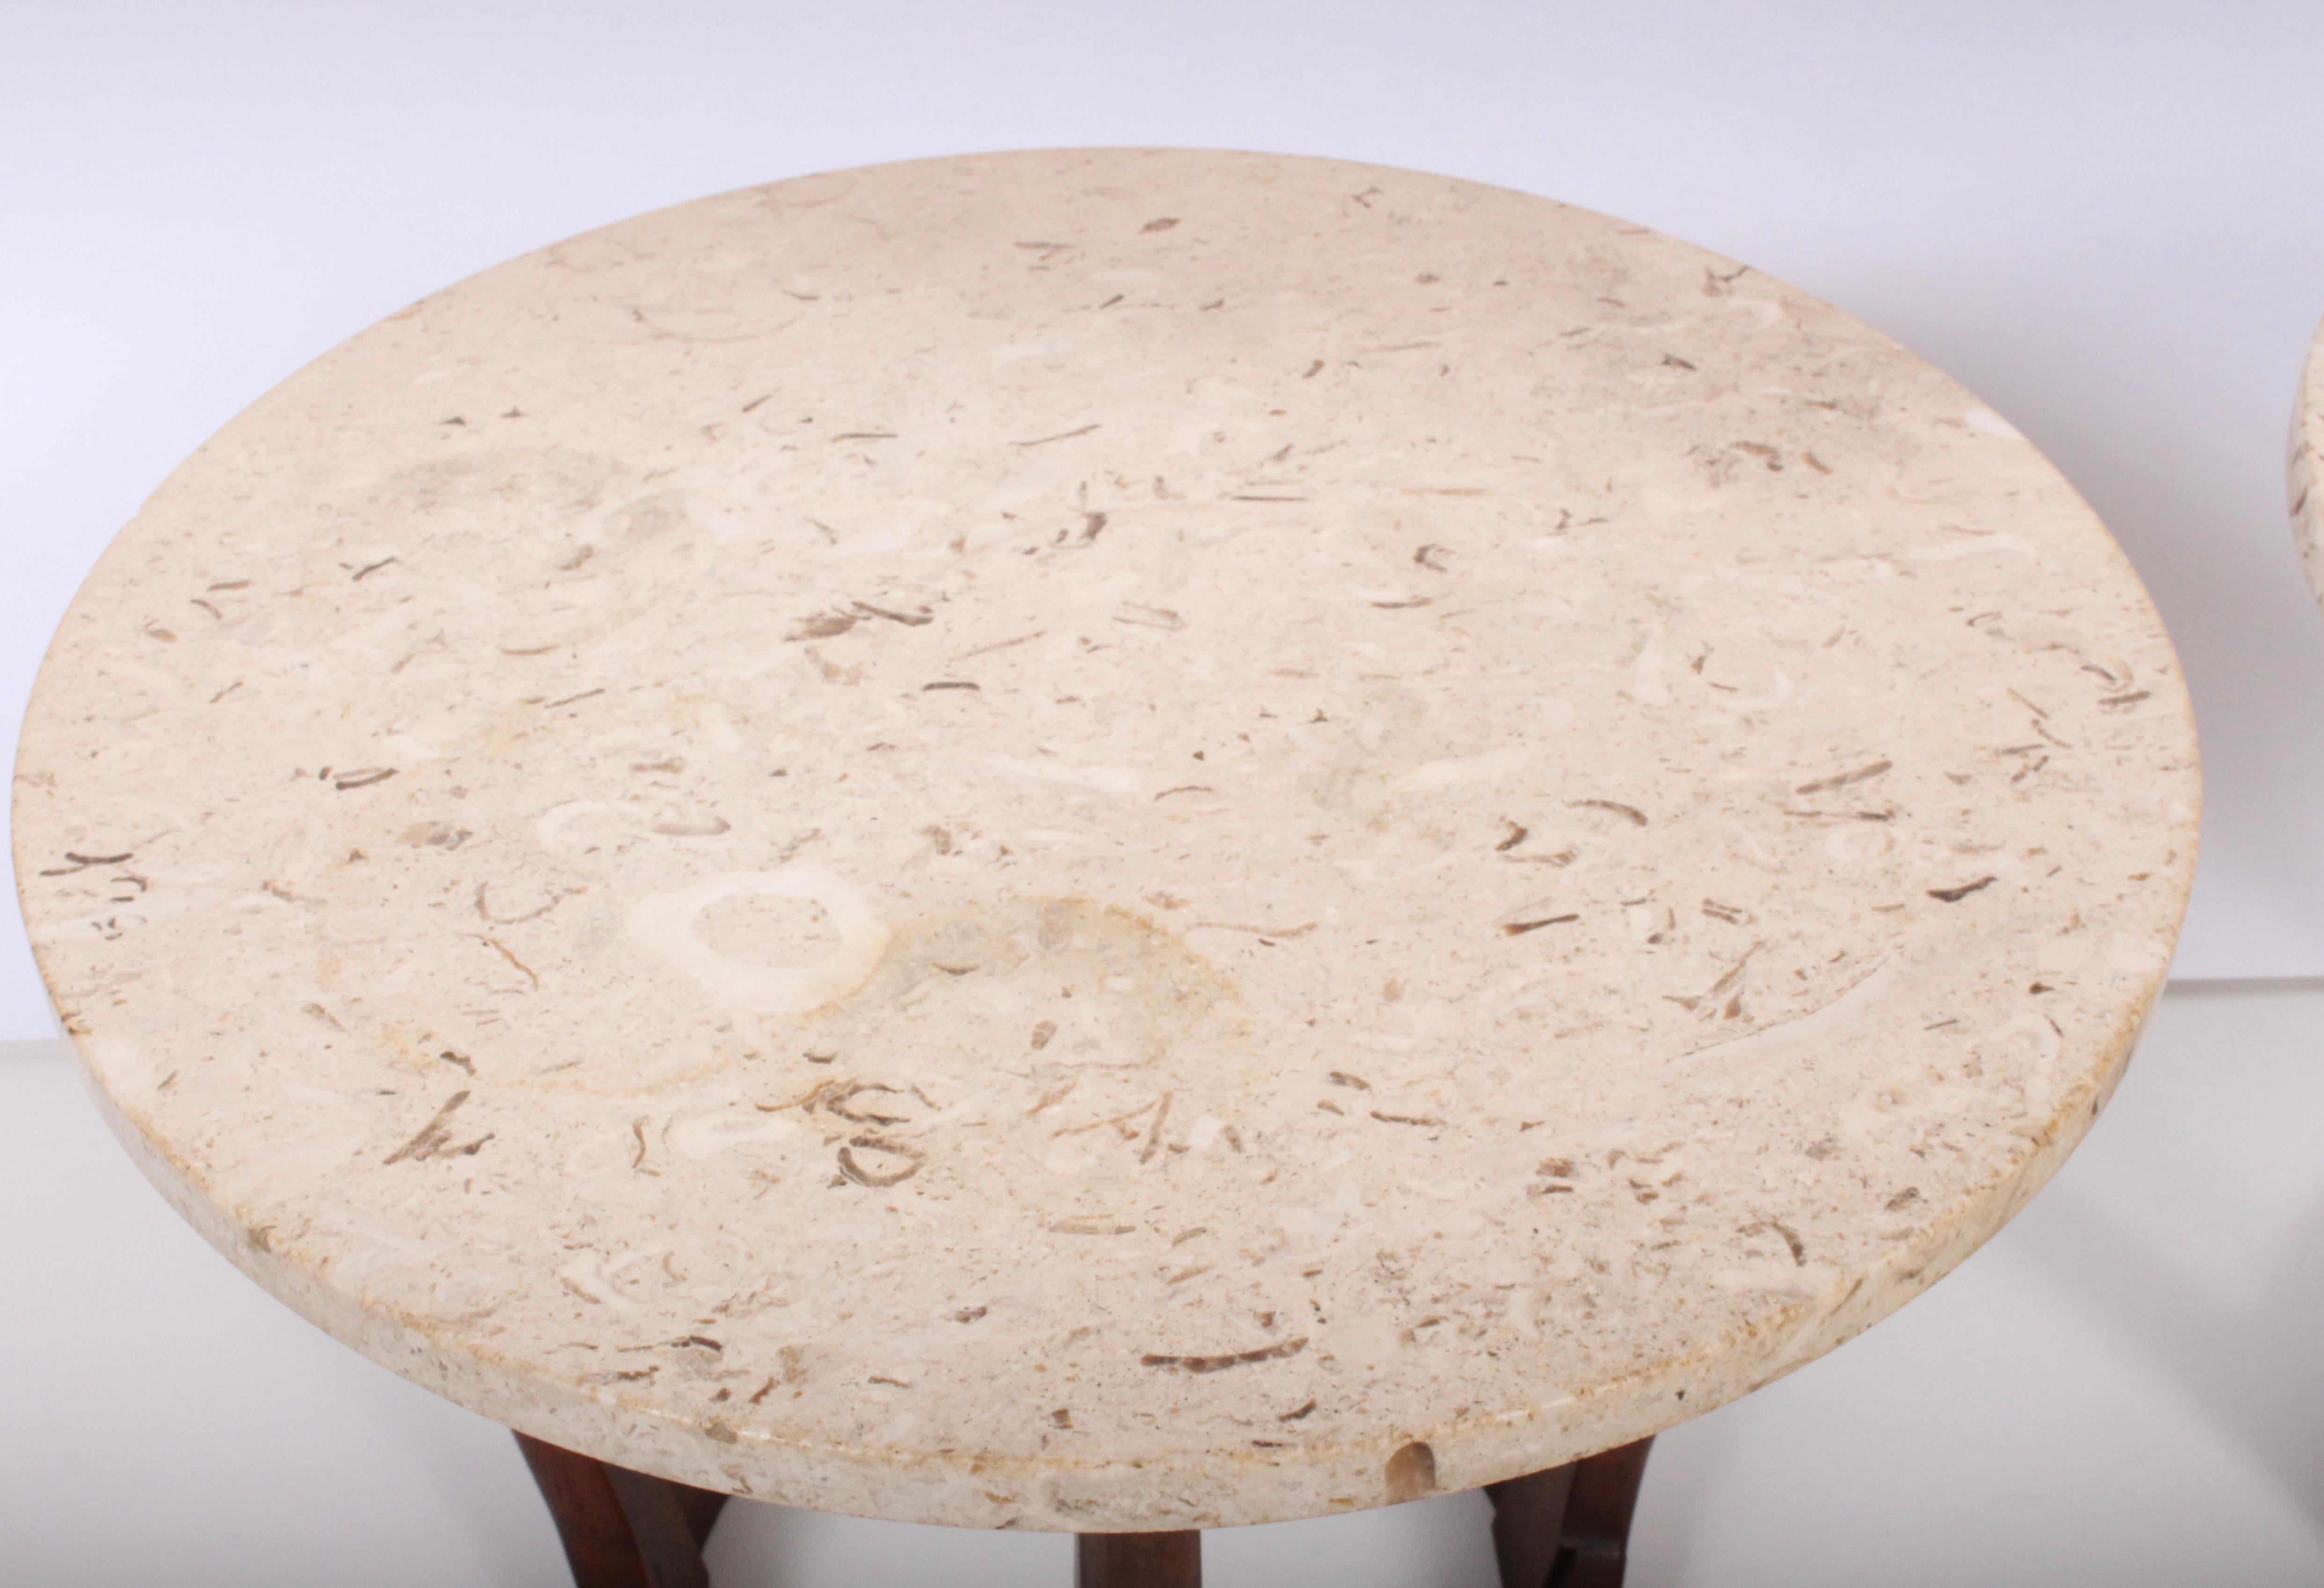 Stained Pair of Lane American Mid-Century Modern Walnut and Round Travertine End Tables